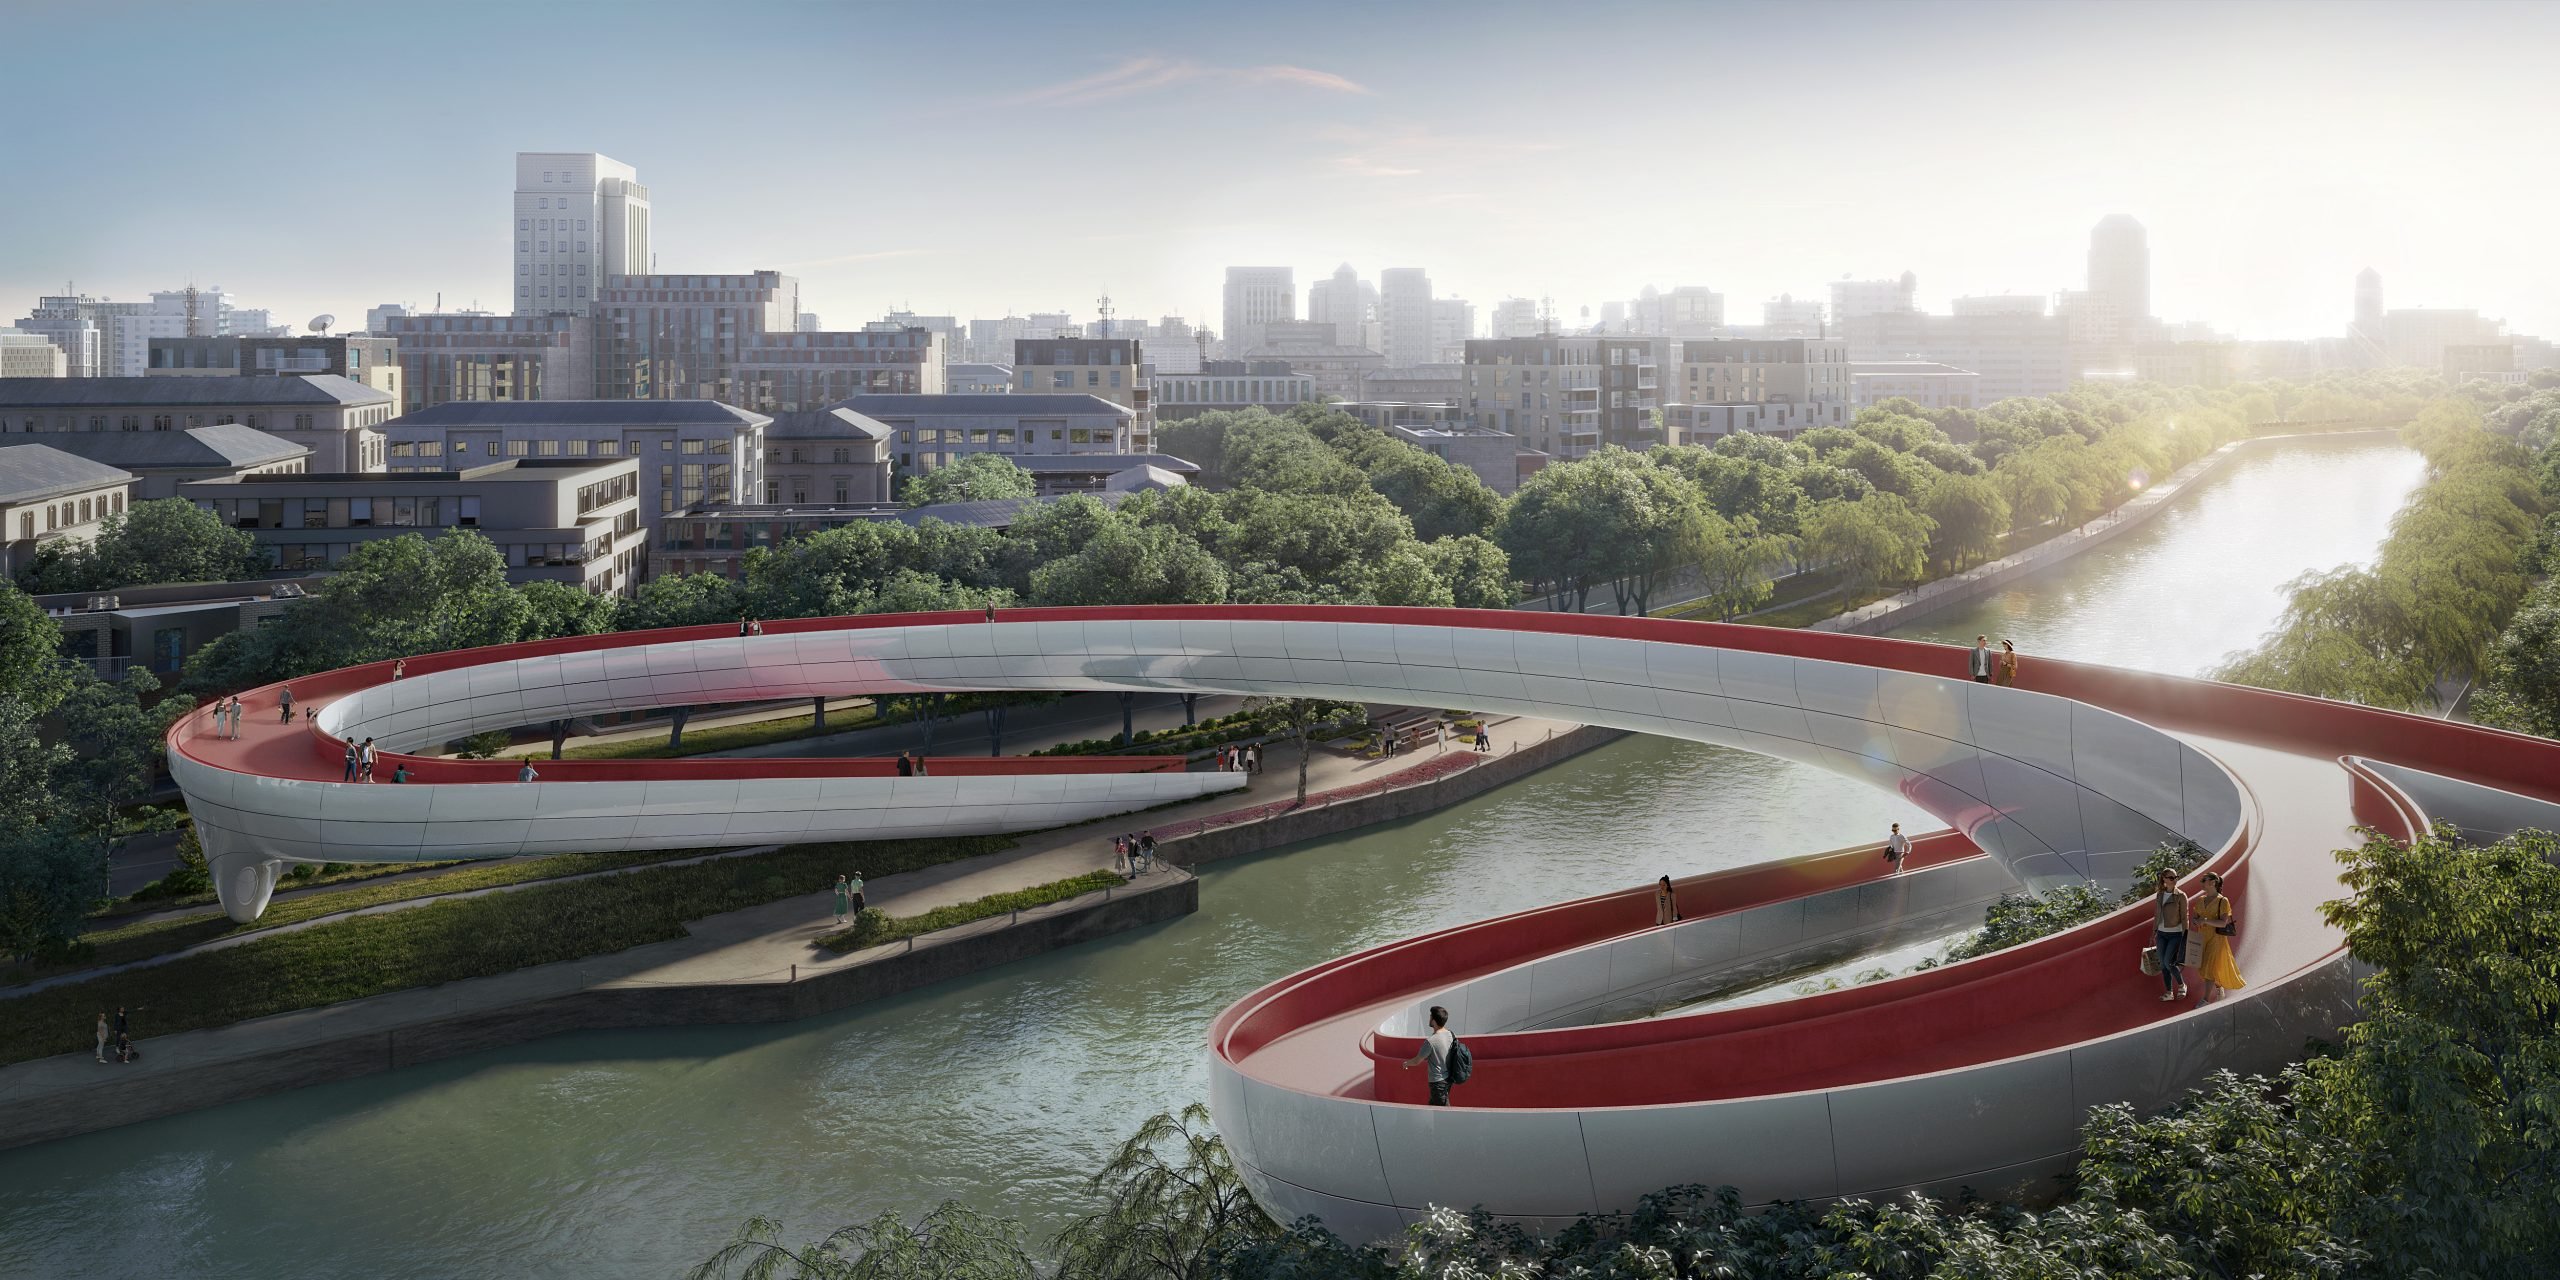 RMJM Milano’s design for the pedestrian bridge project in China was shortlisted for the International Concept Design Competition.